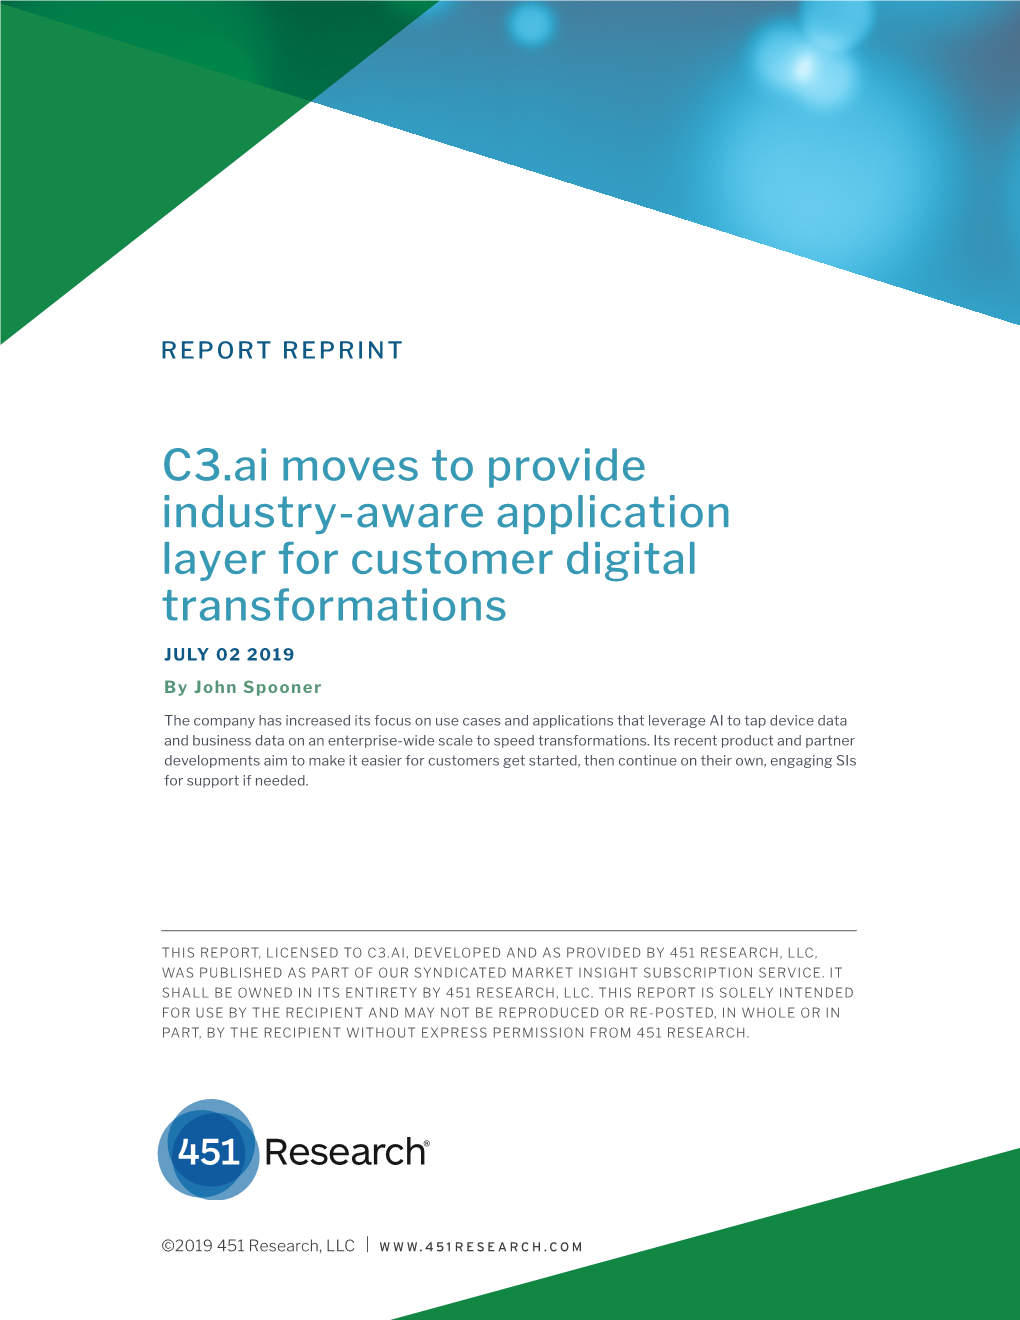 C3.Ai Moves to Provide Industry-Aware Application Layer for Customer Digital Transformations